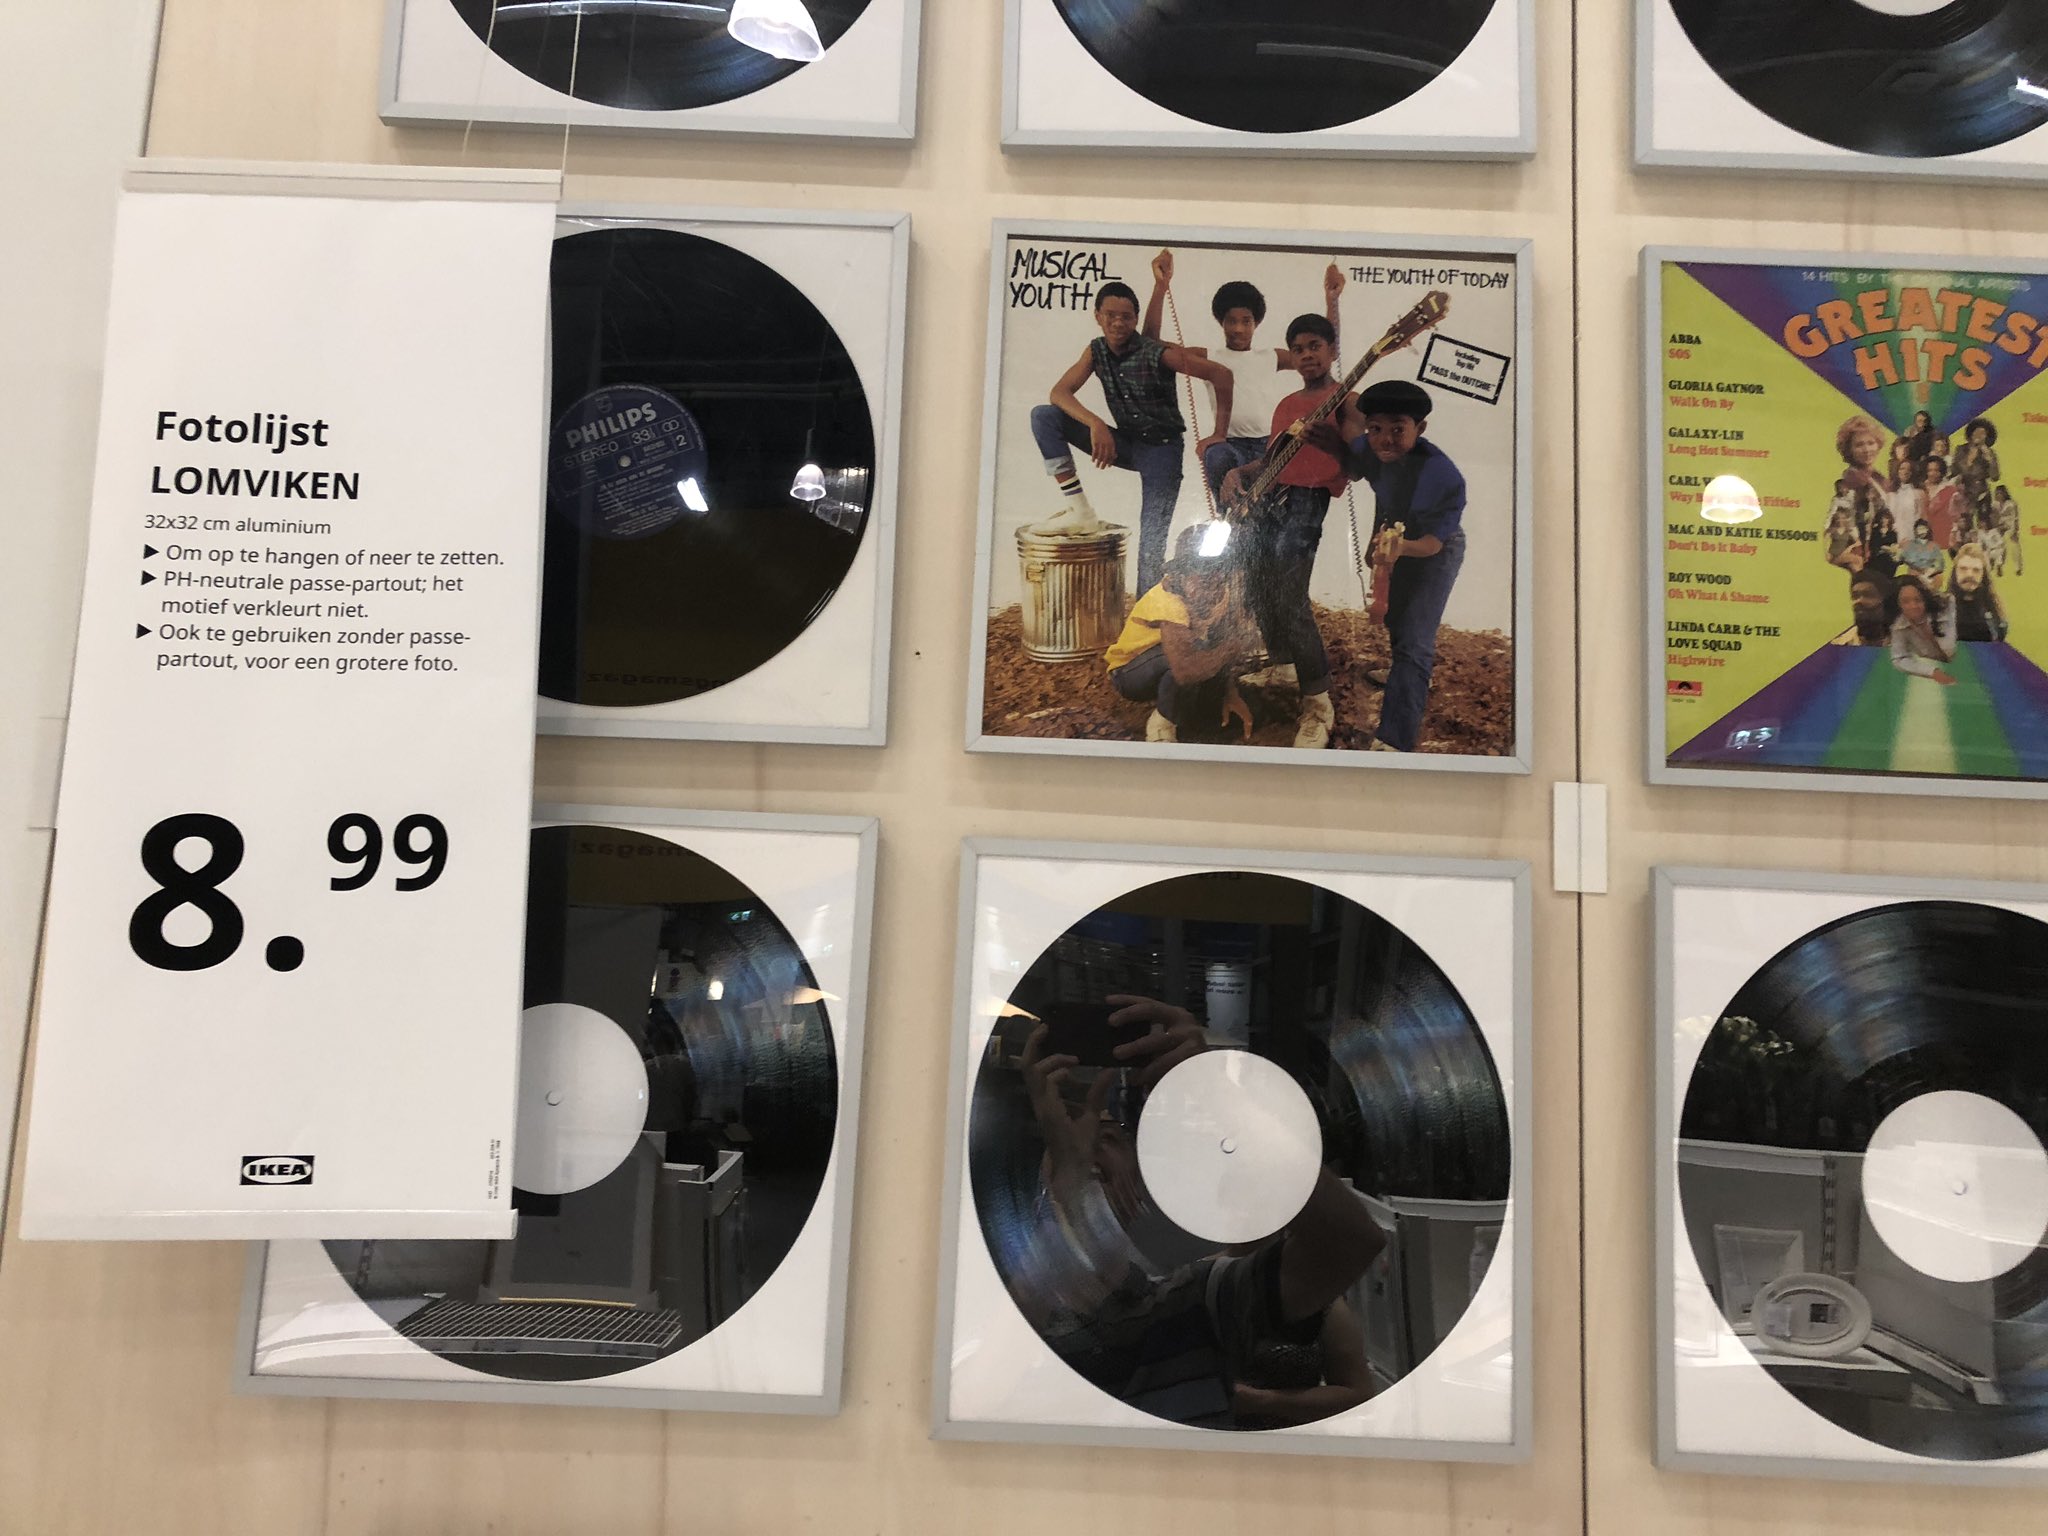 Wanneer Geven Piraat Musical Youth on Twitter: "It looks like @IKEANederland likes us too!  Pictures by @DJFreezNL at IKEA Zwolle (Netherlands)  https://t.co/NXlo3NKvv6" / Twitter